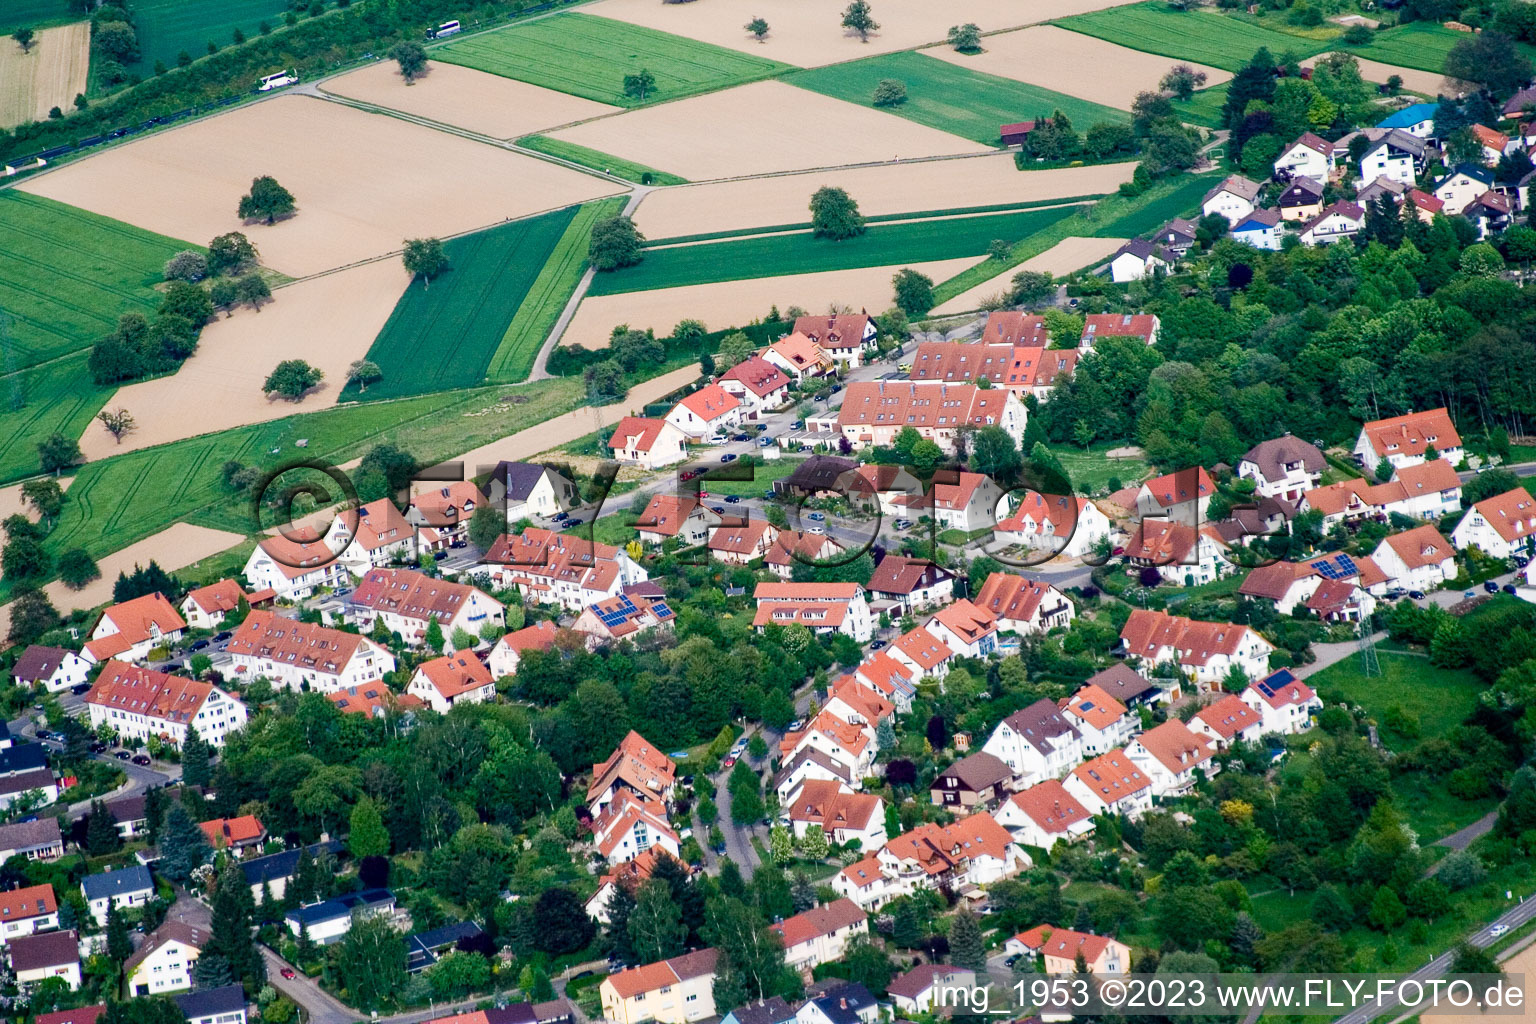 District Grünwettersbach in Karlsruhe in the state Baden-Wuerttemberg, Germany seen from above